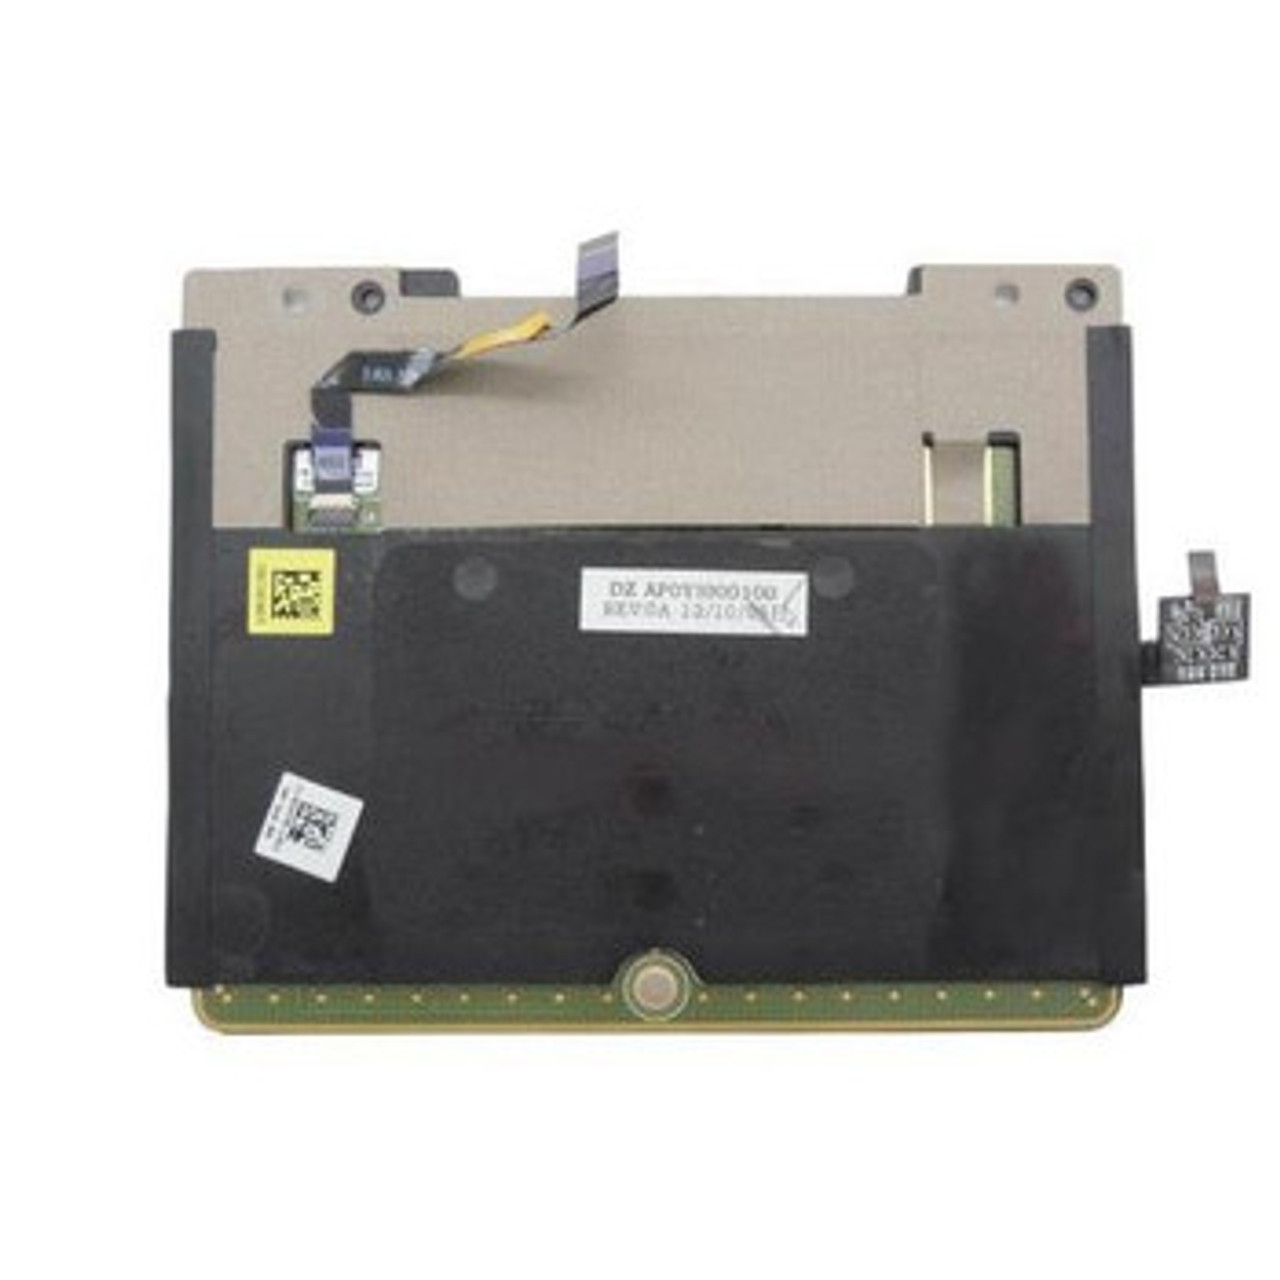 HWCP0 | Dell | Xps 15 9530 Touchpad Sensor Module